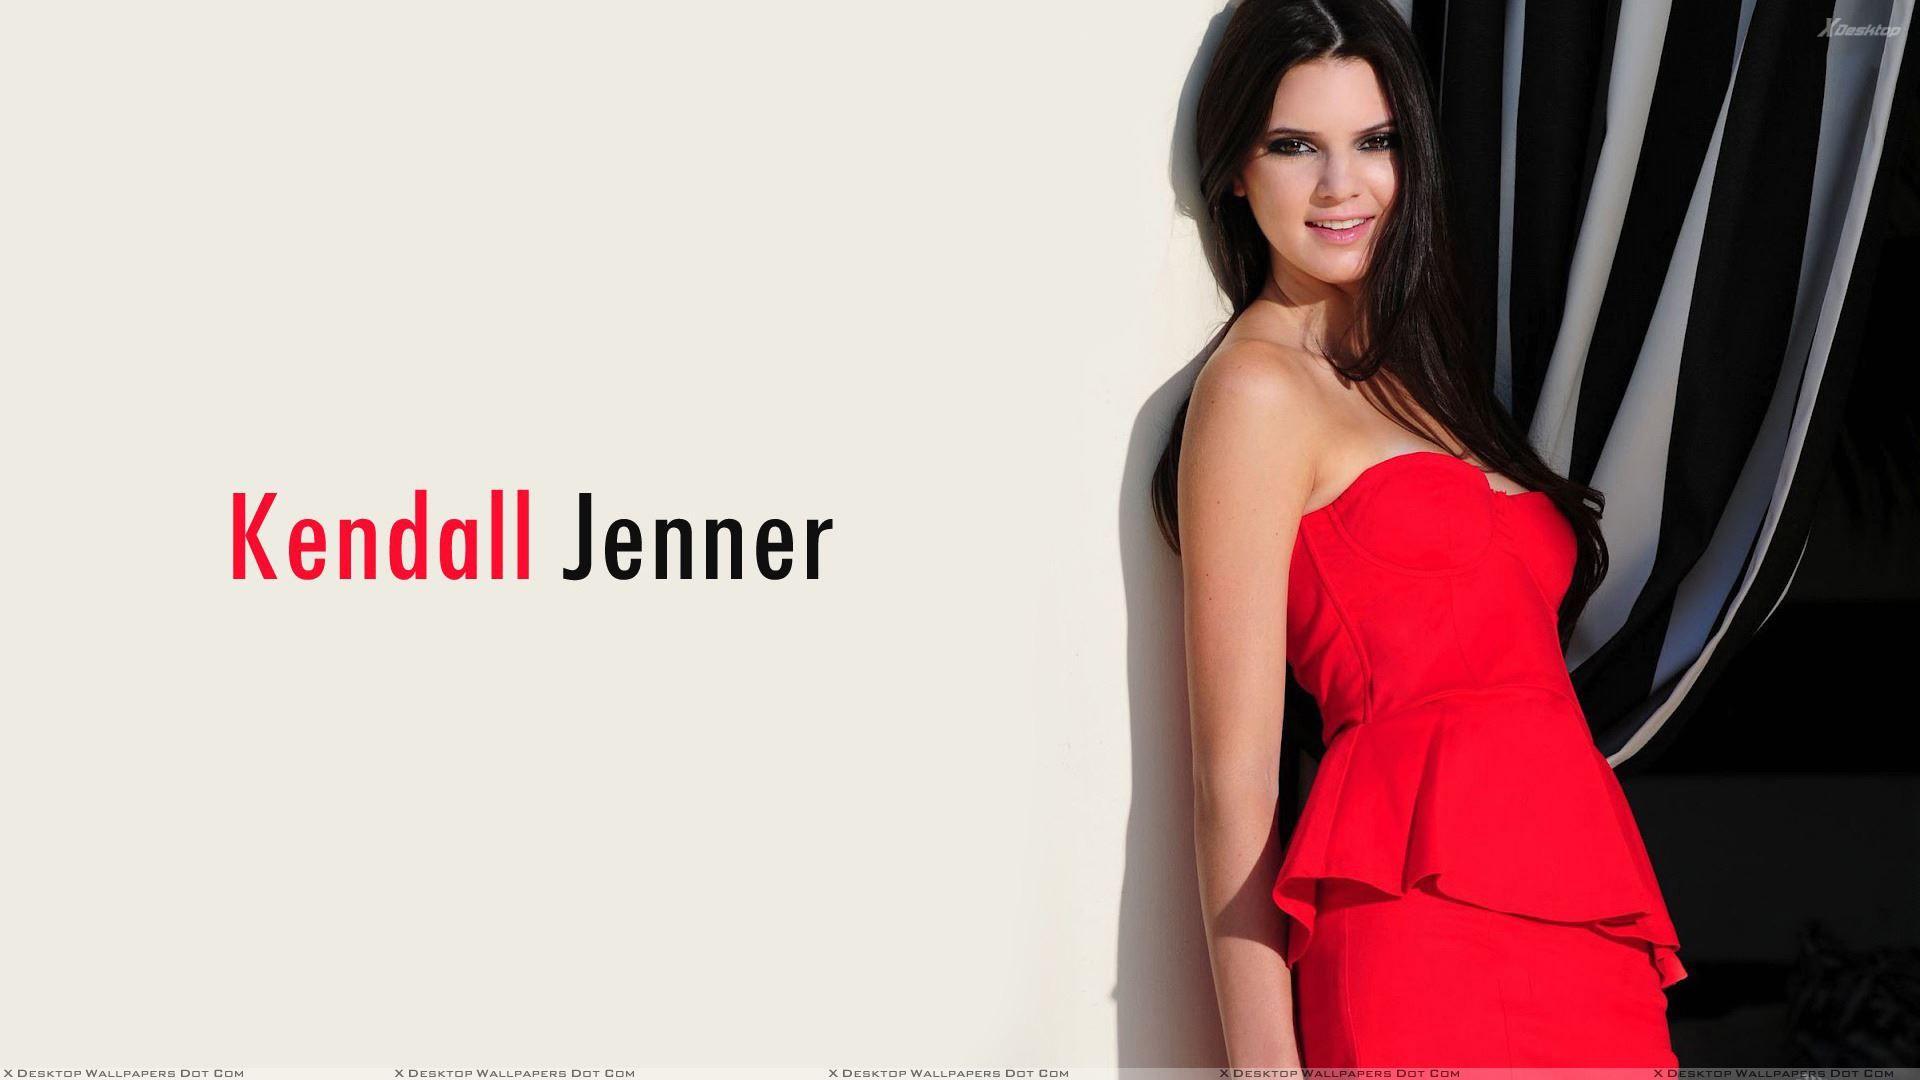 Kendall Jenner Wallpaper, Photo & Image in HD